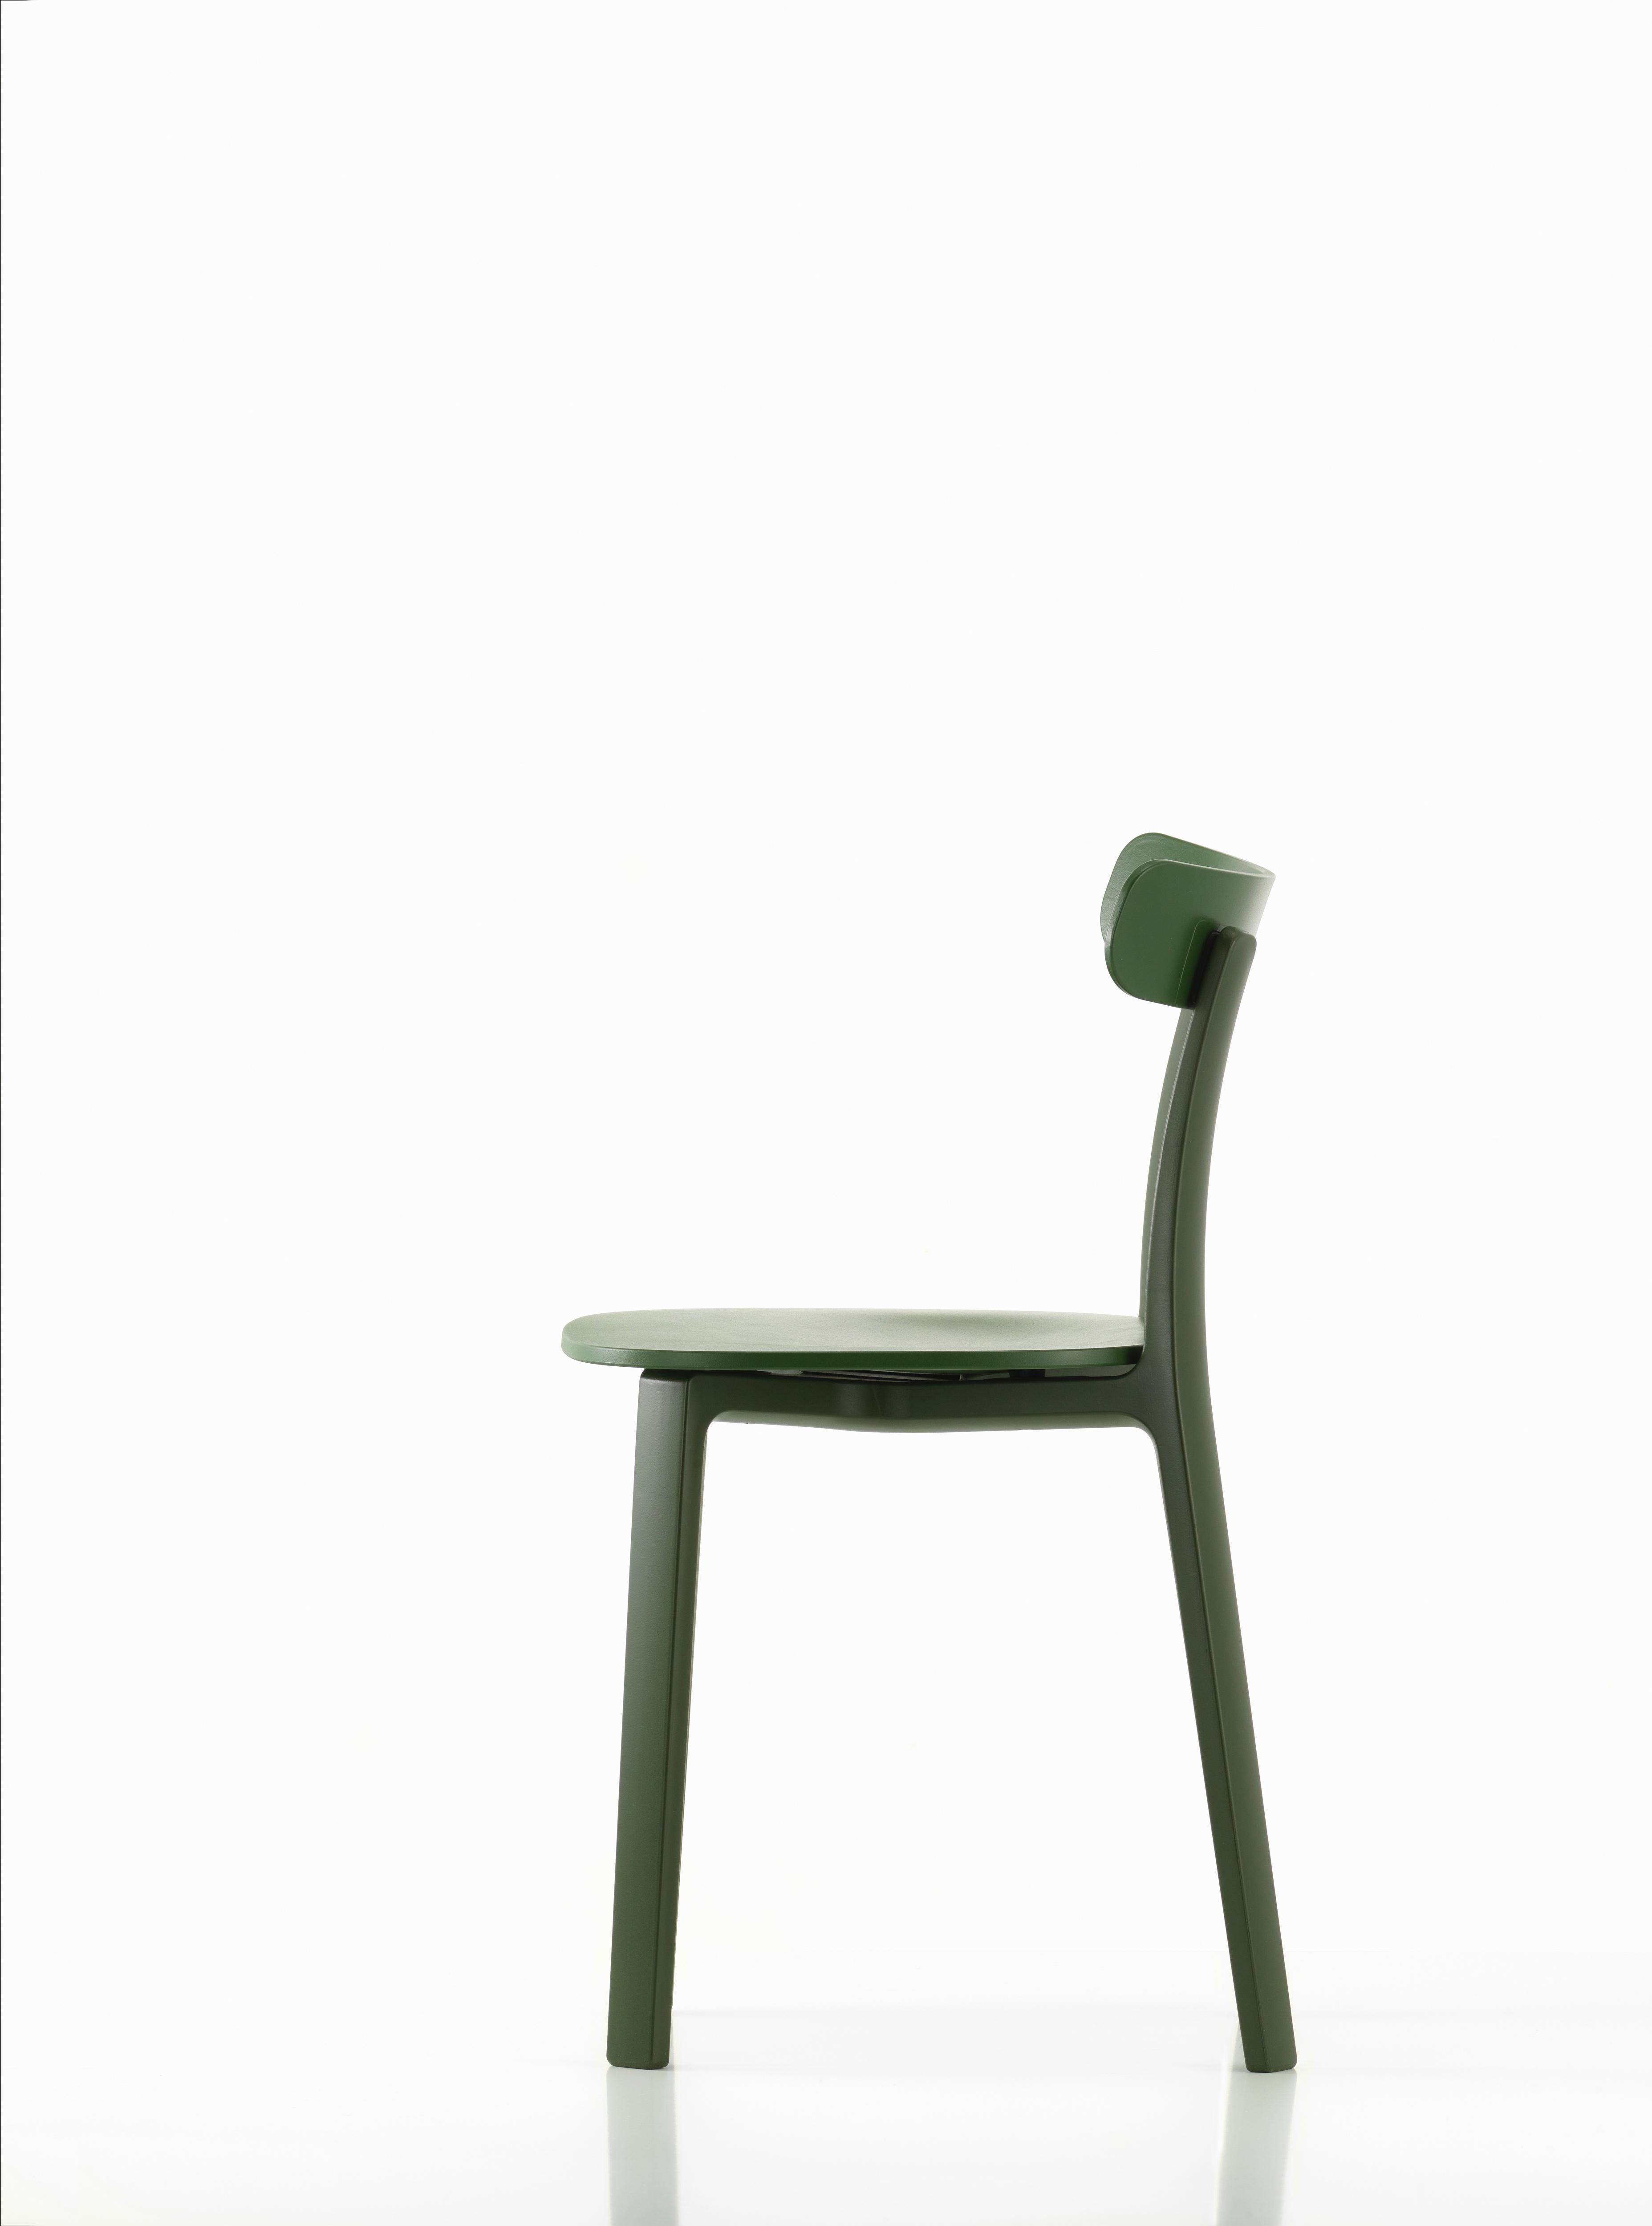 Modern Vitra All Plastic Chair in Ivy Two-Tone by Jasper Morrison